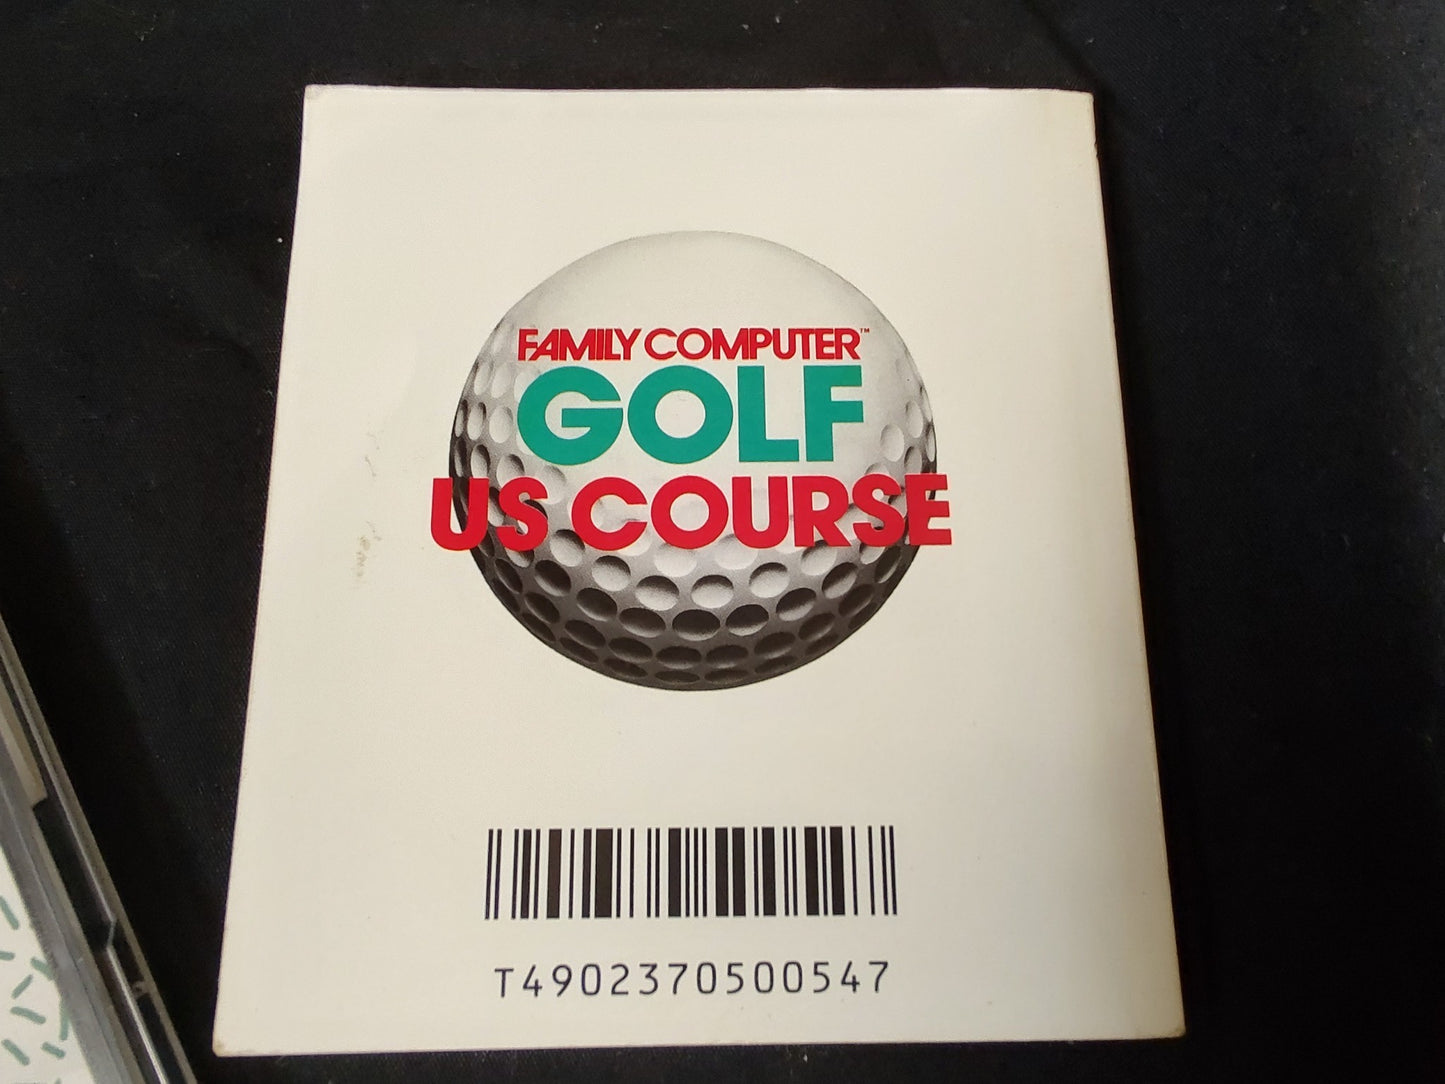 Mario Golf US Coruse (NES) Disk System, Game disk and box set, working-f0922-